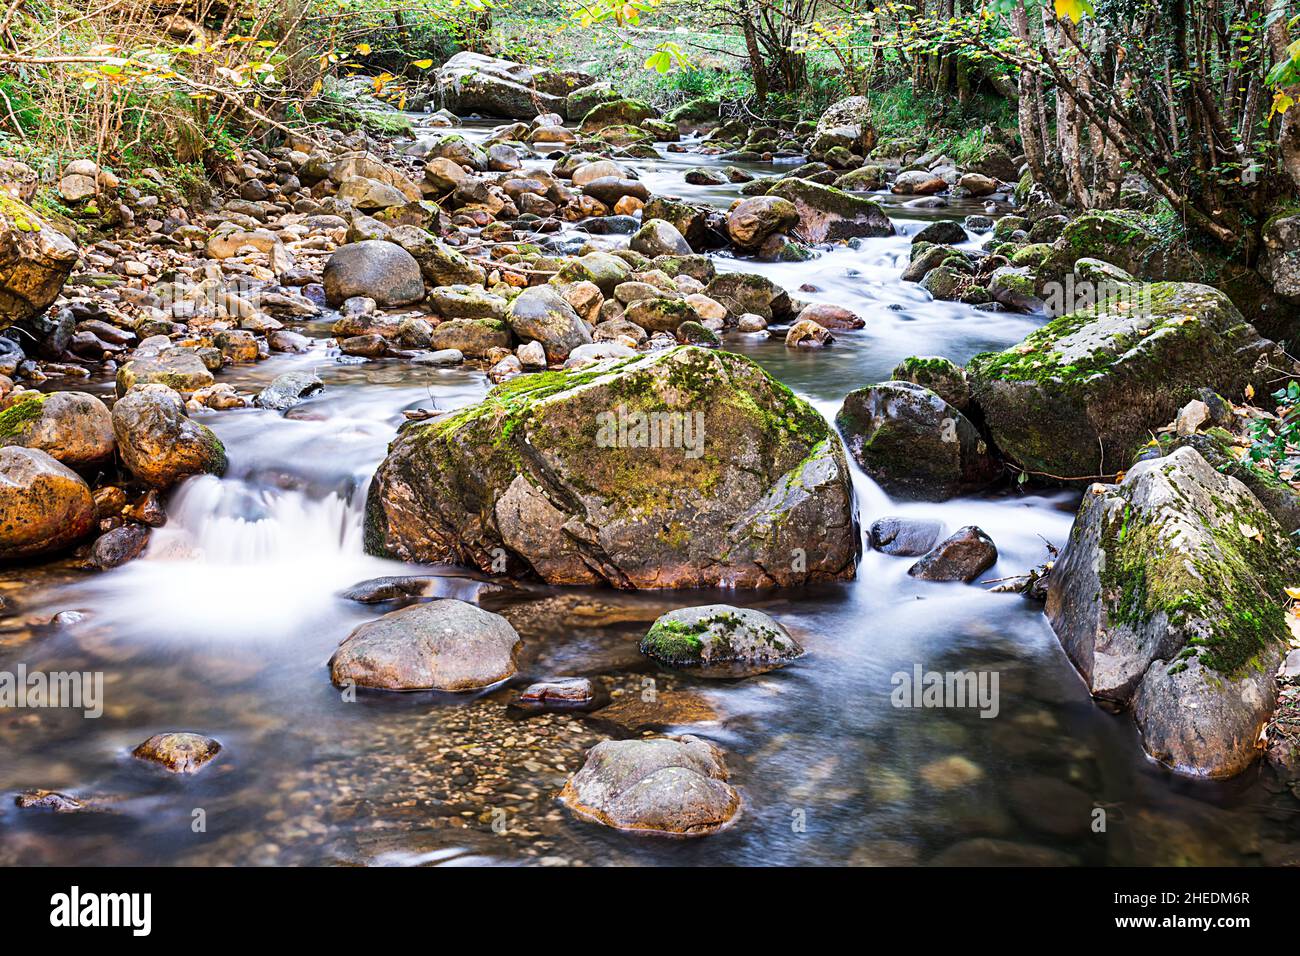 Photograph of a river with silky water effect.The photo has been taken on the Alba route that starts from the famous Asturian town Soto de Agues. Stock Photo